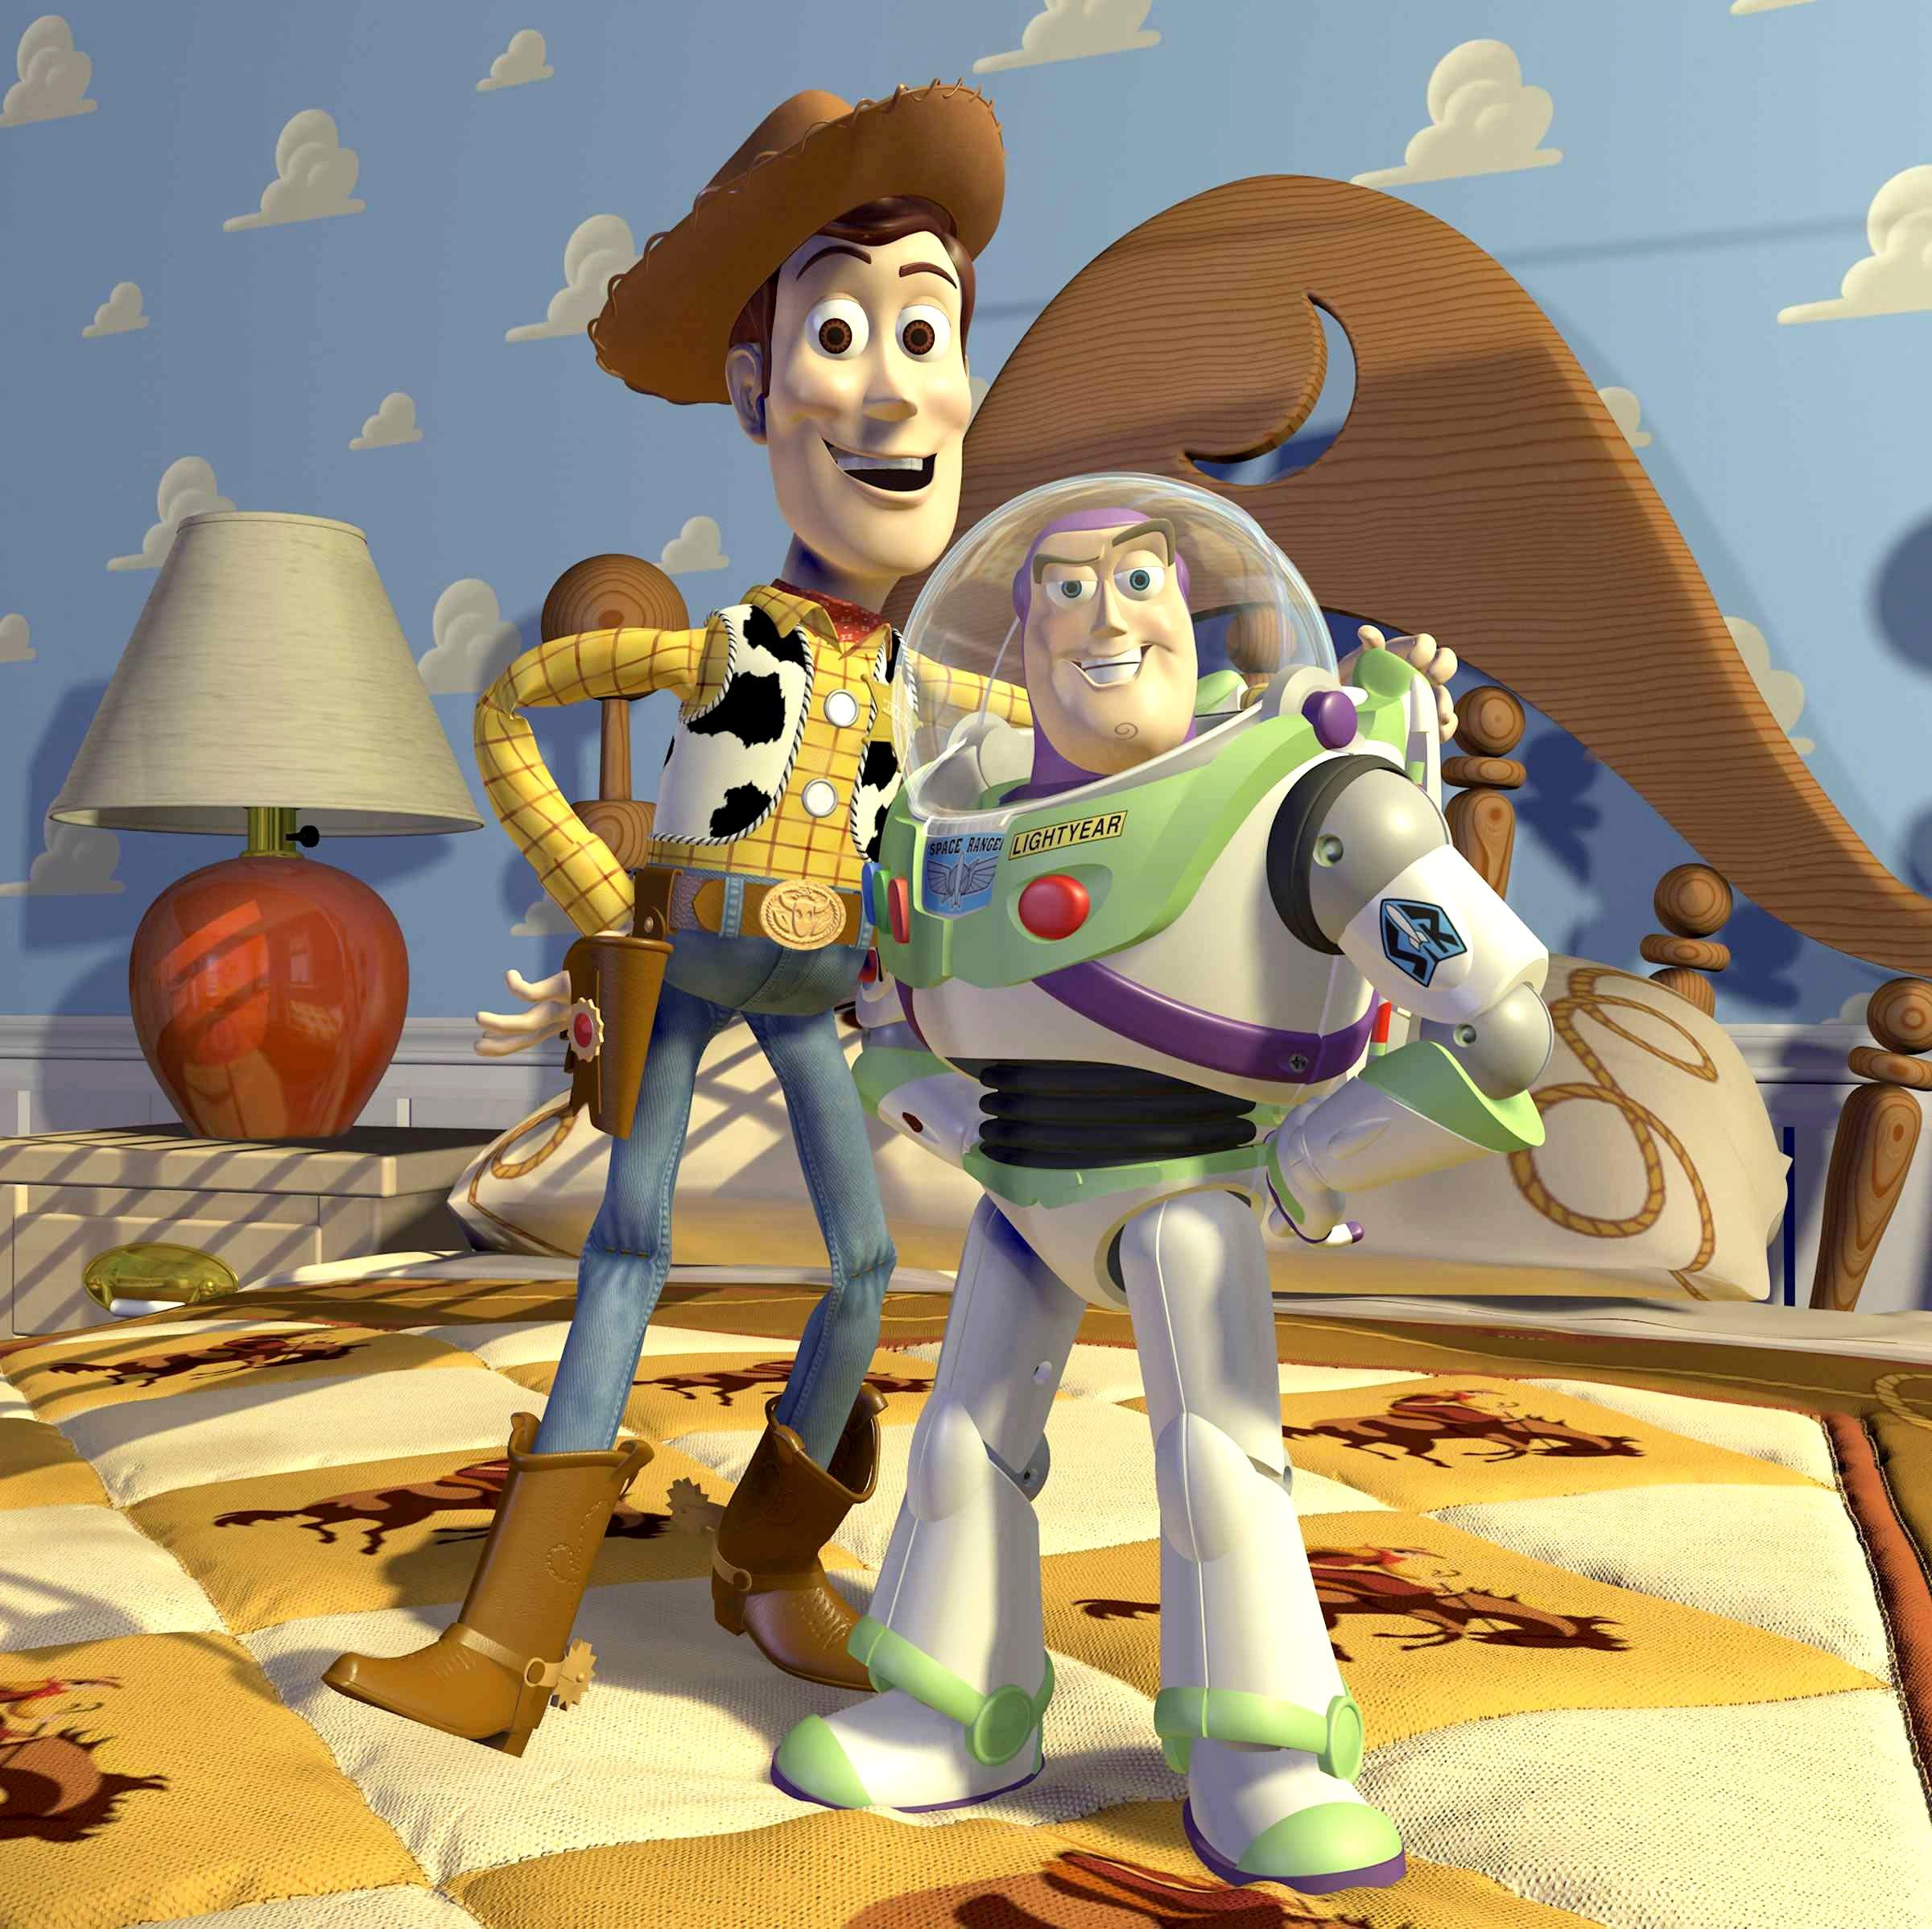 Toy Story 4' Coming In 2017 With John Lasseter Directing